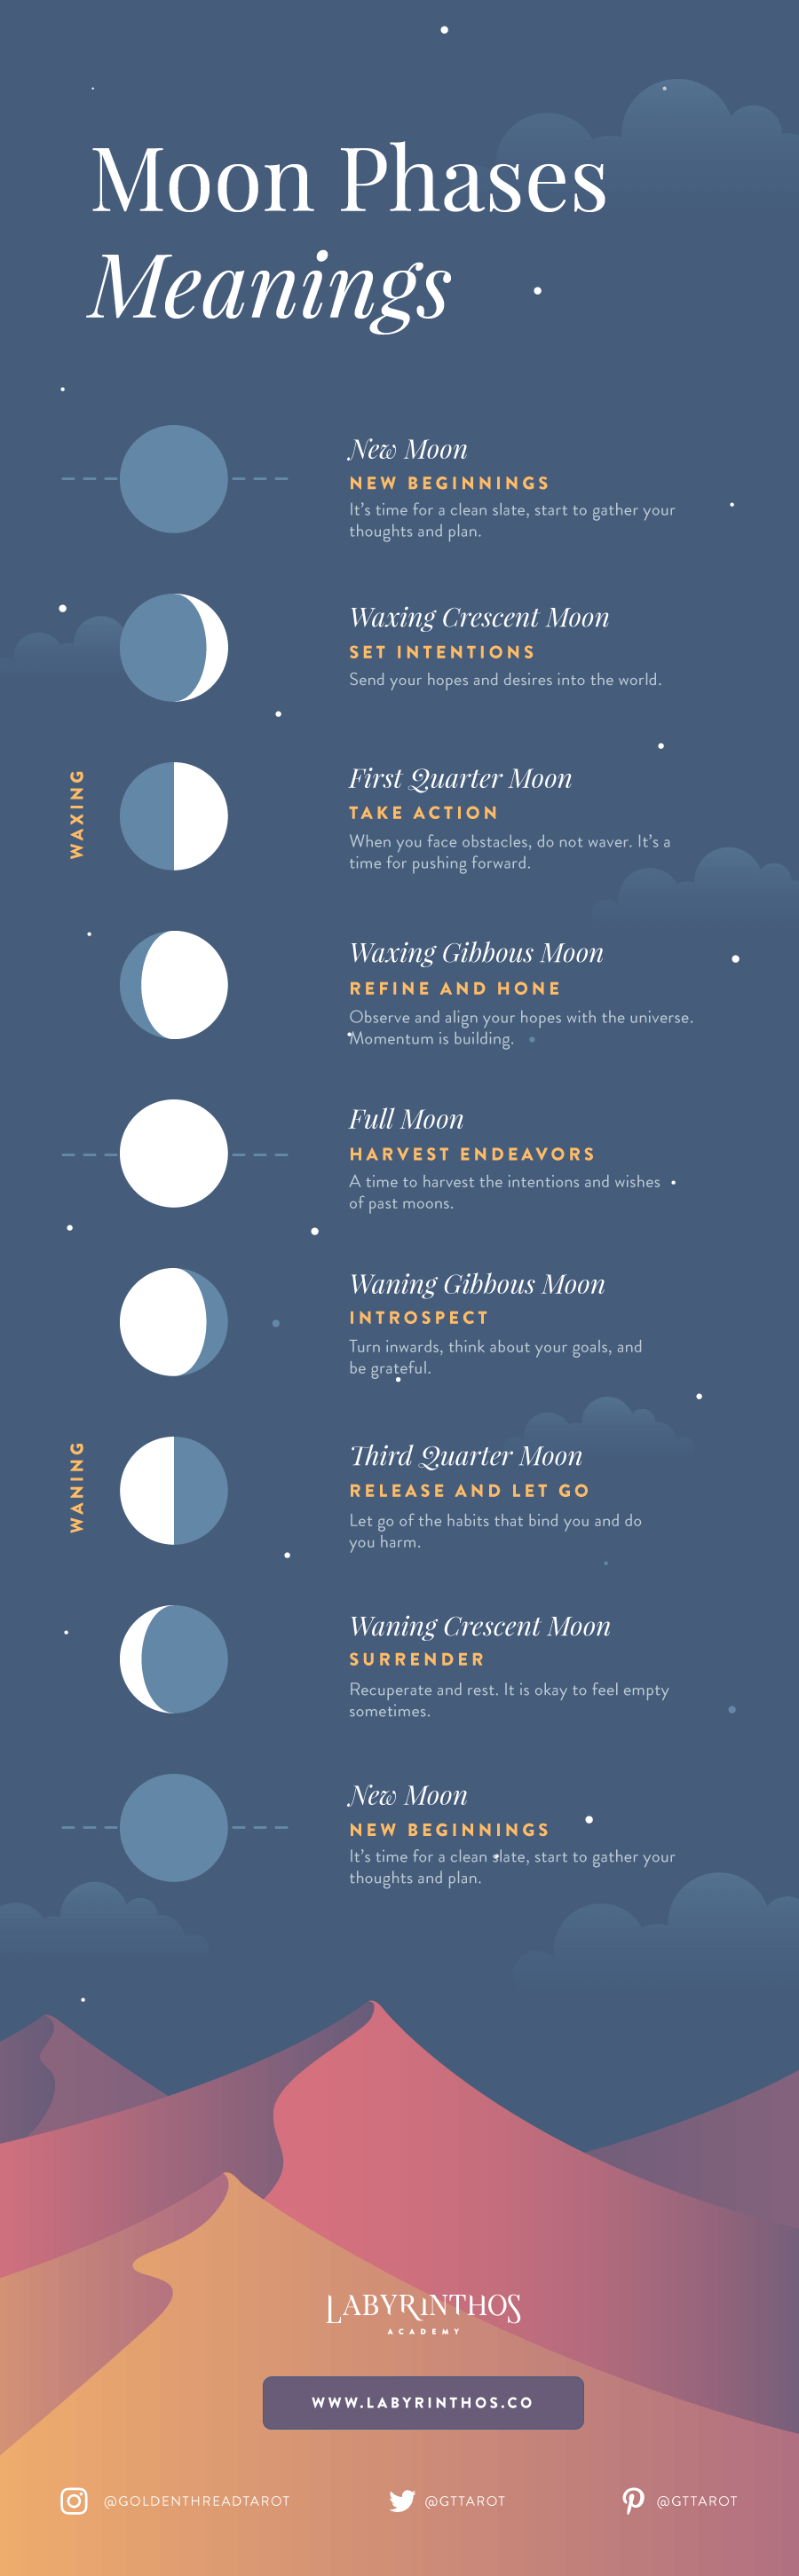 What Causes Moon Phases All 8 Moon Phases Explained I - vrogue.co